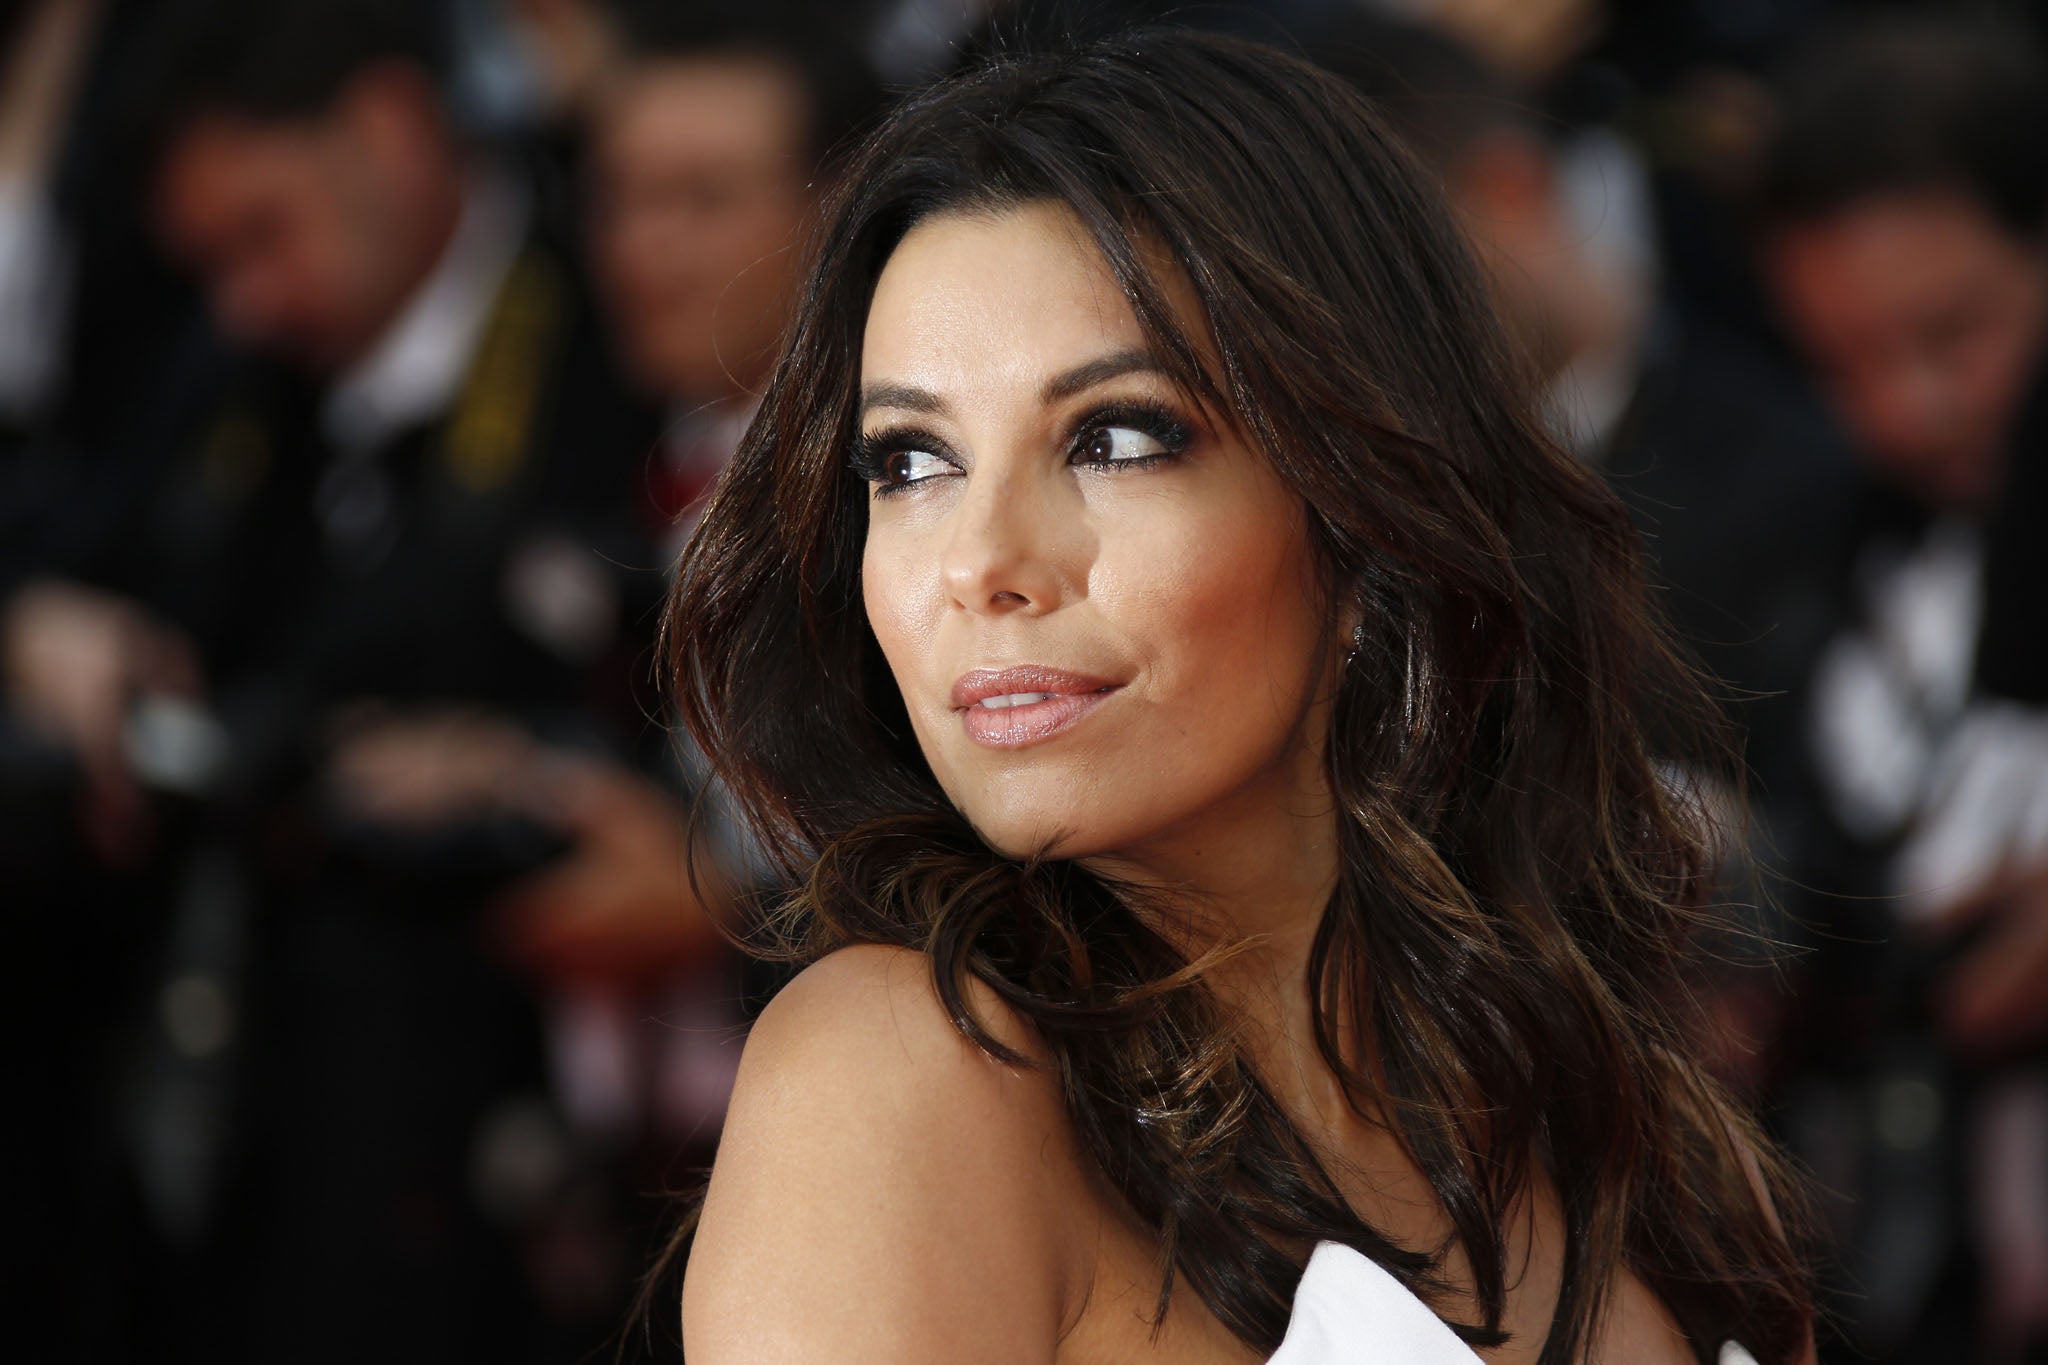 Eva Longoria on naked photo leaks Actress alleges Apple employee accessed her private details without her permission The Independent The Independent image